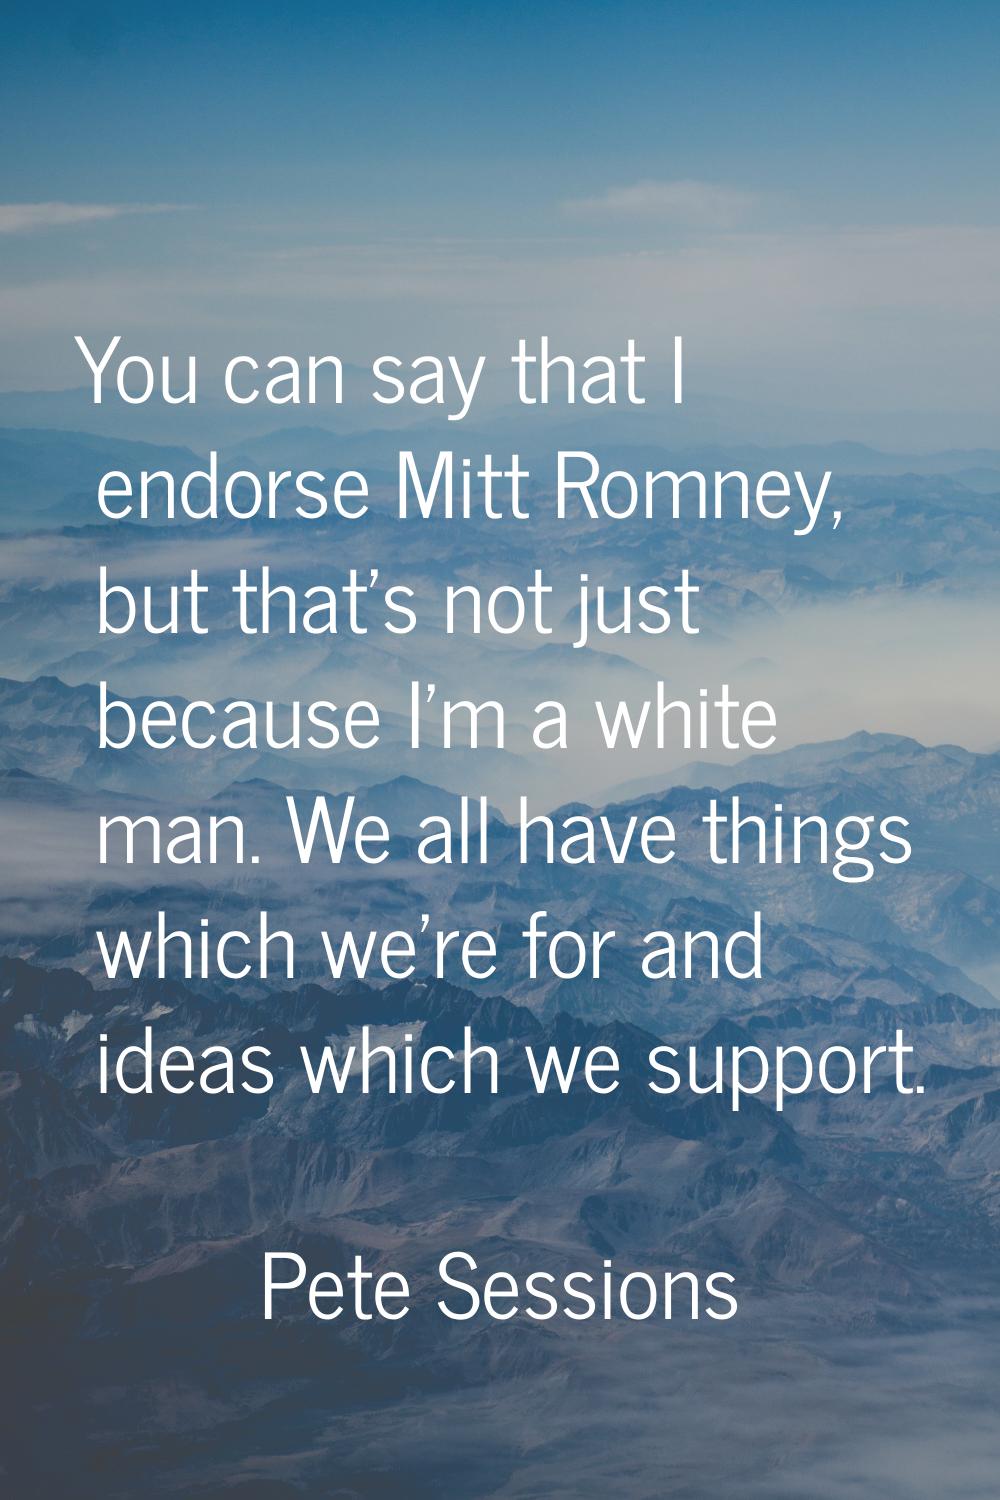 You can say that I endorse Mitt Romney, but that's not just because I'm a white man. We all have th